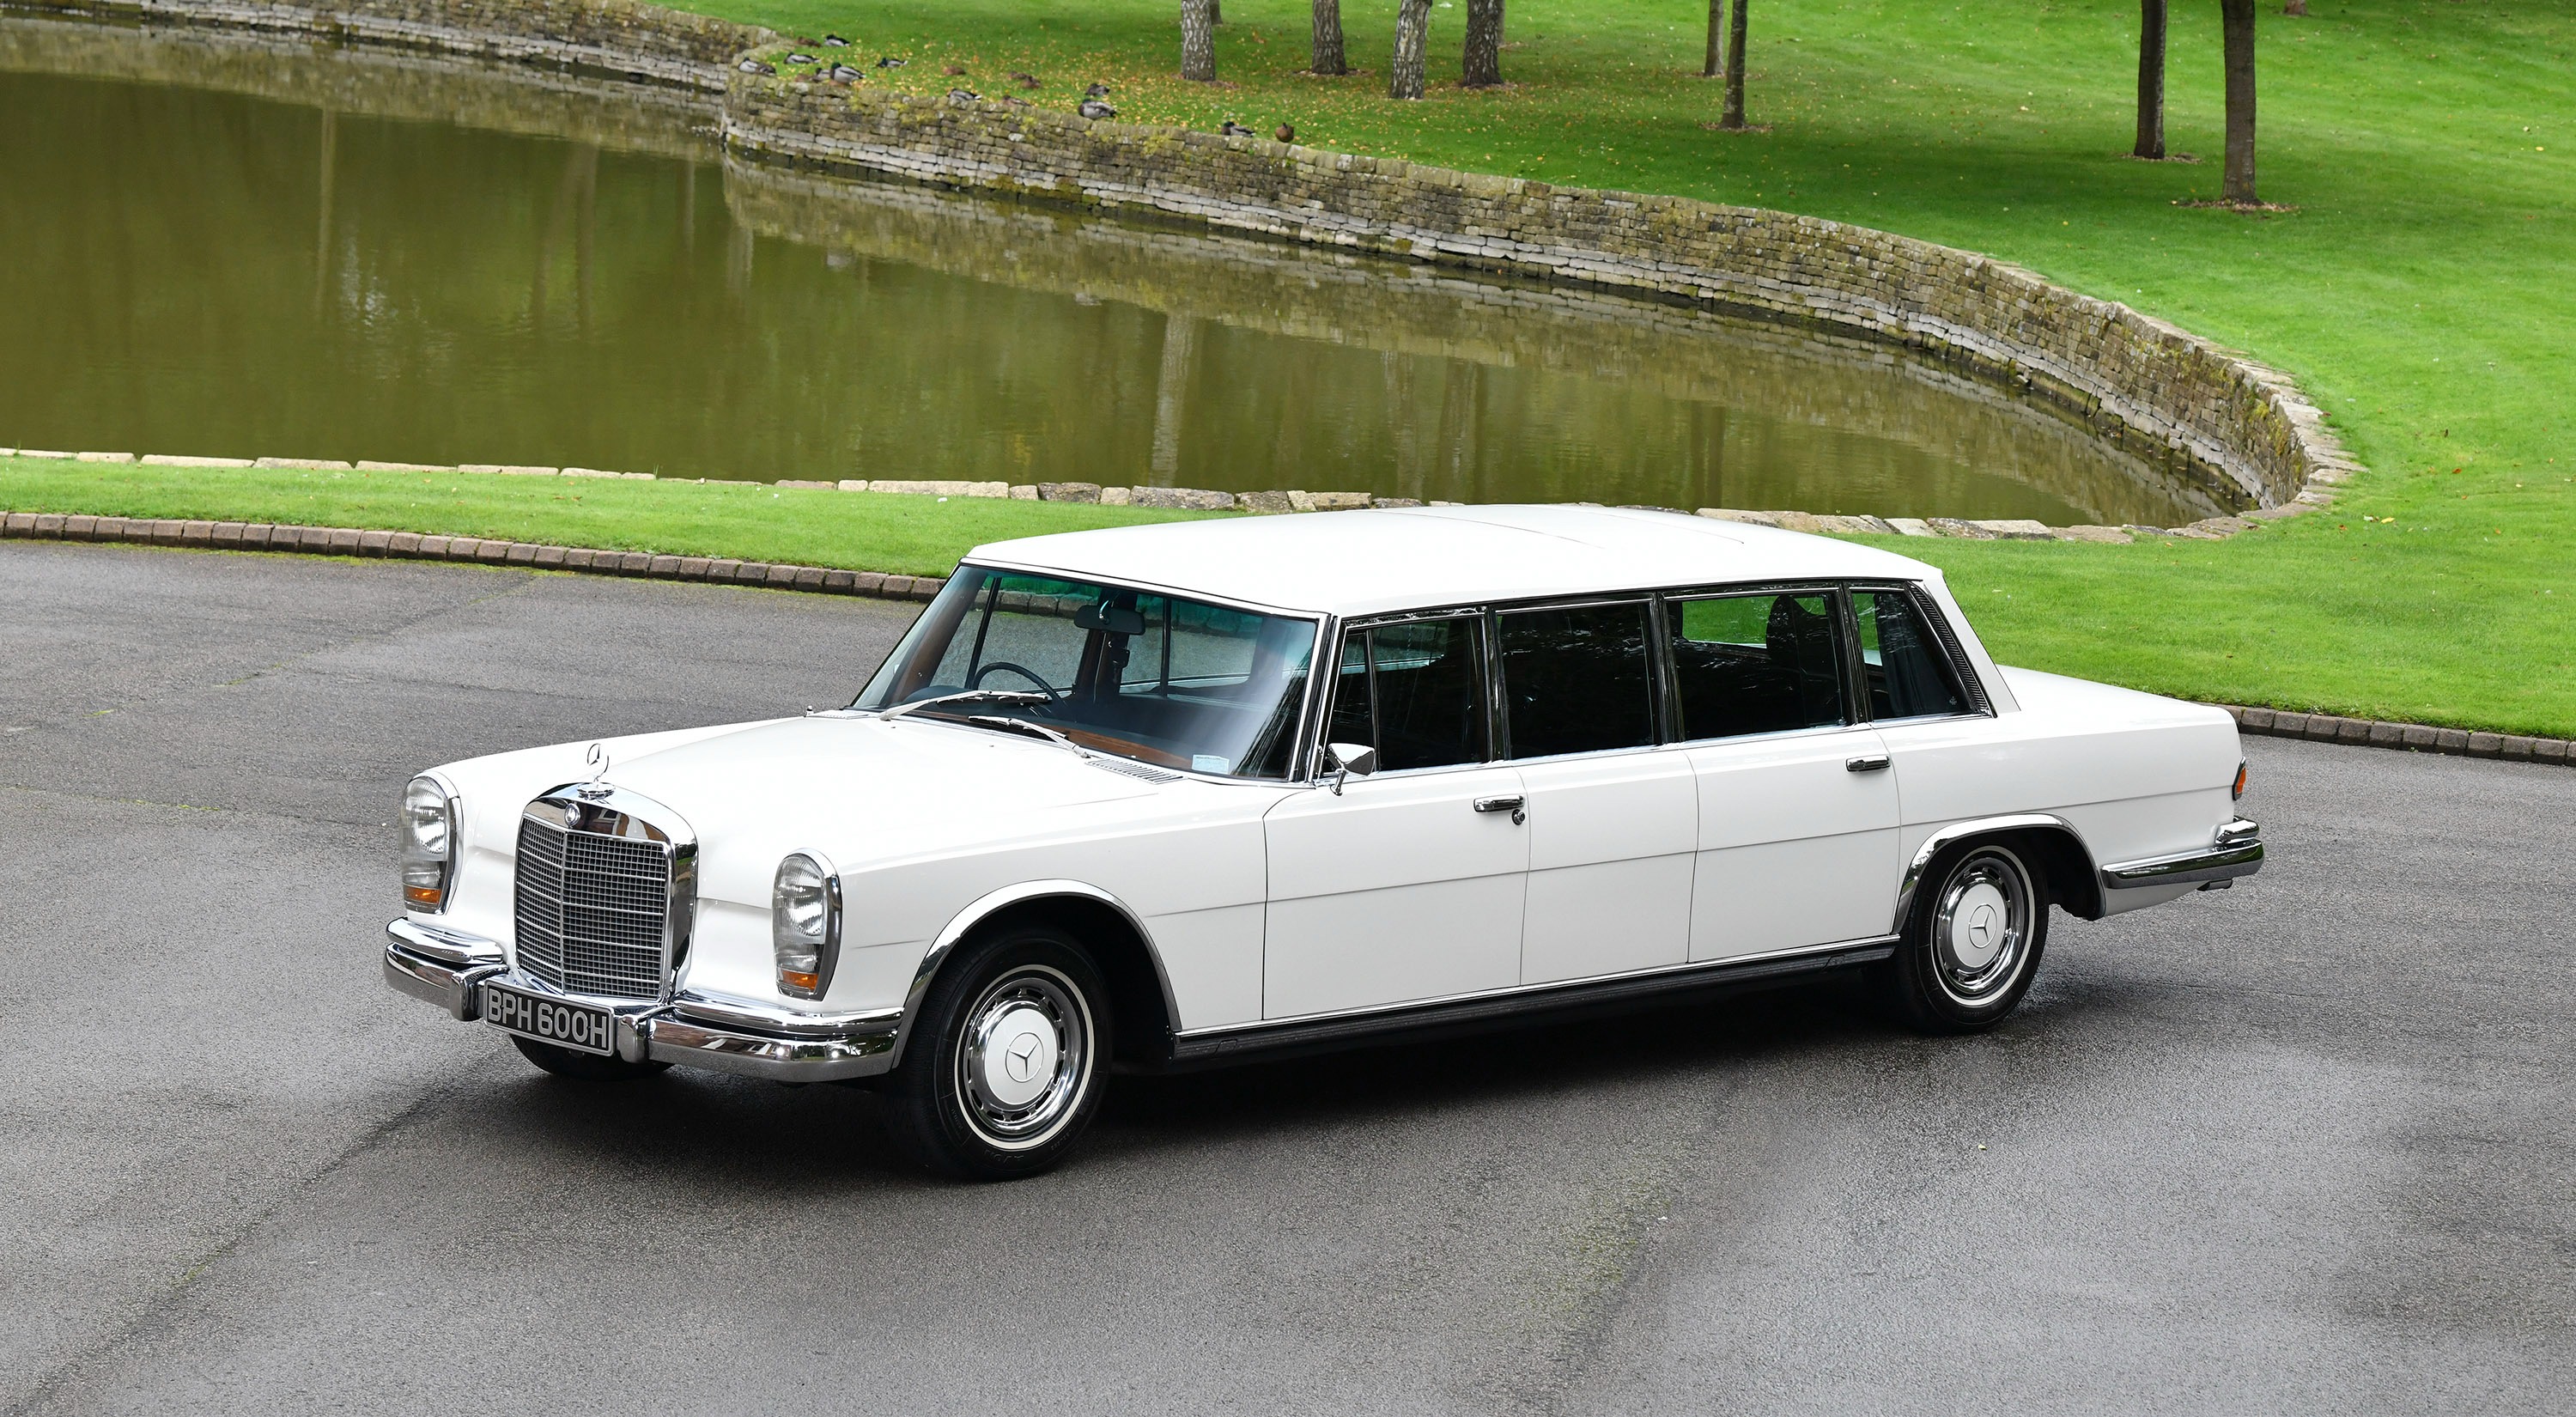 Another of his Mercs was a Pullman limo that belonged to all four Beatles at different times